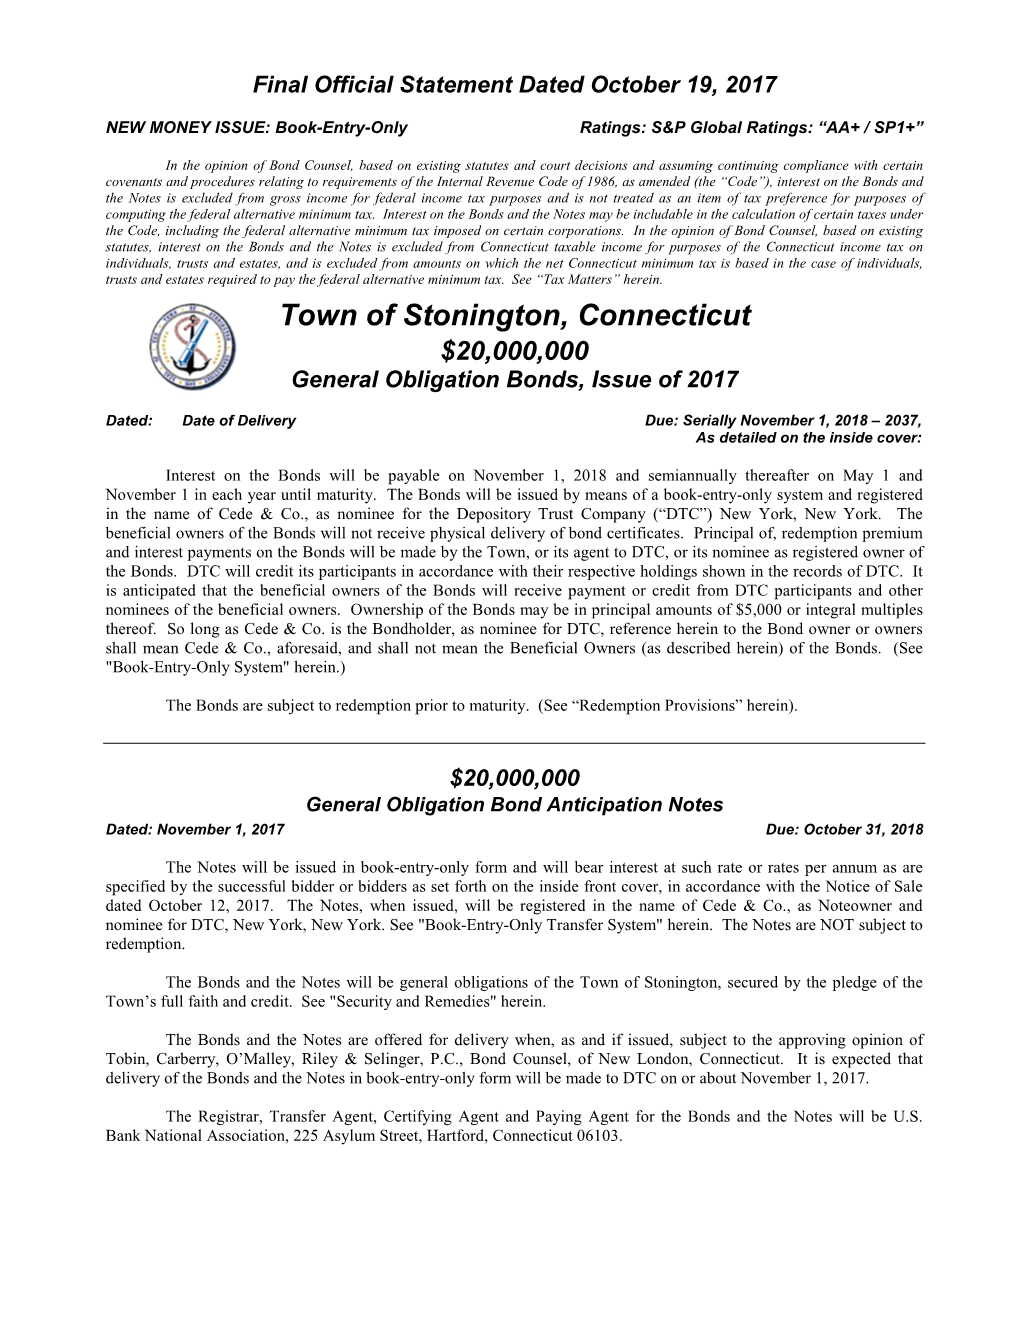 Town of Stonington, Connecticut $20,000,000 General Obligation Bonds, Issue of 2017